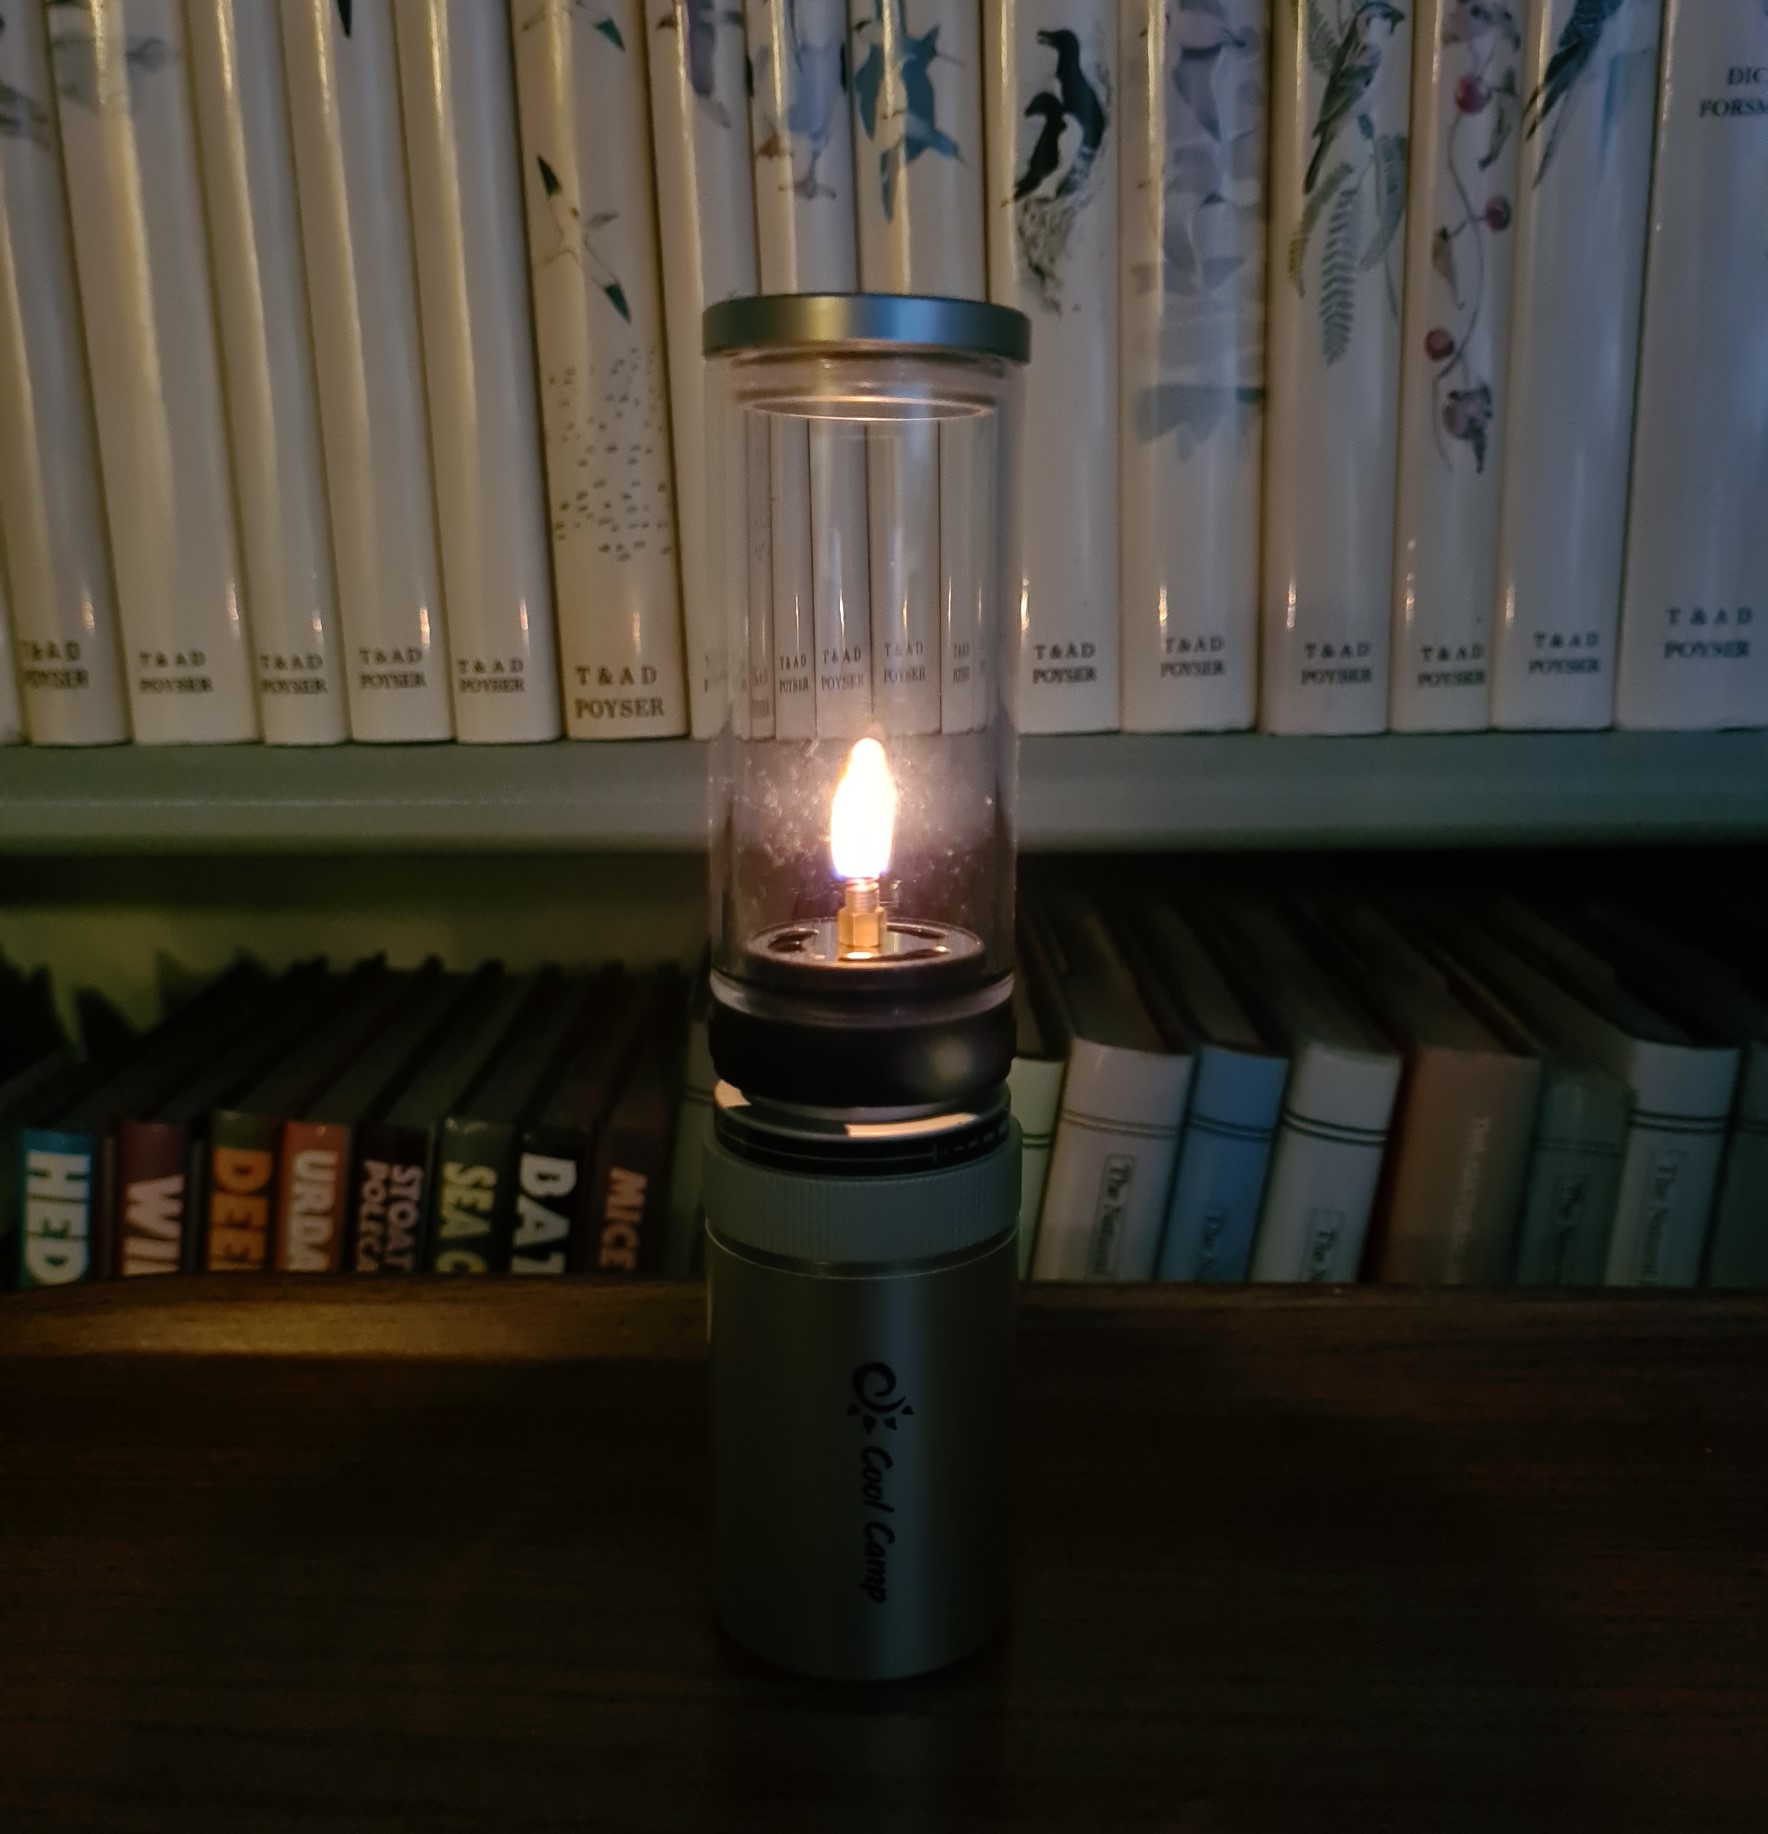 Candle as a stove, anyone? - Backpacking Light